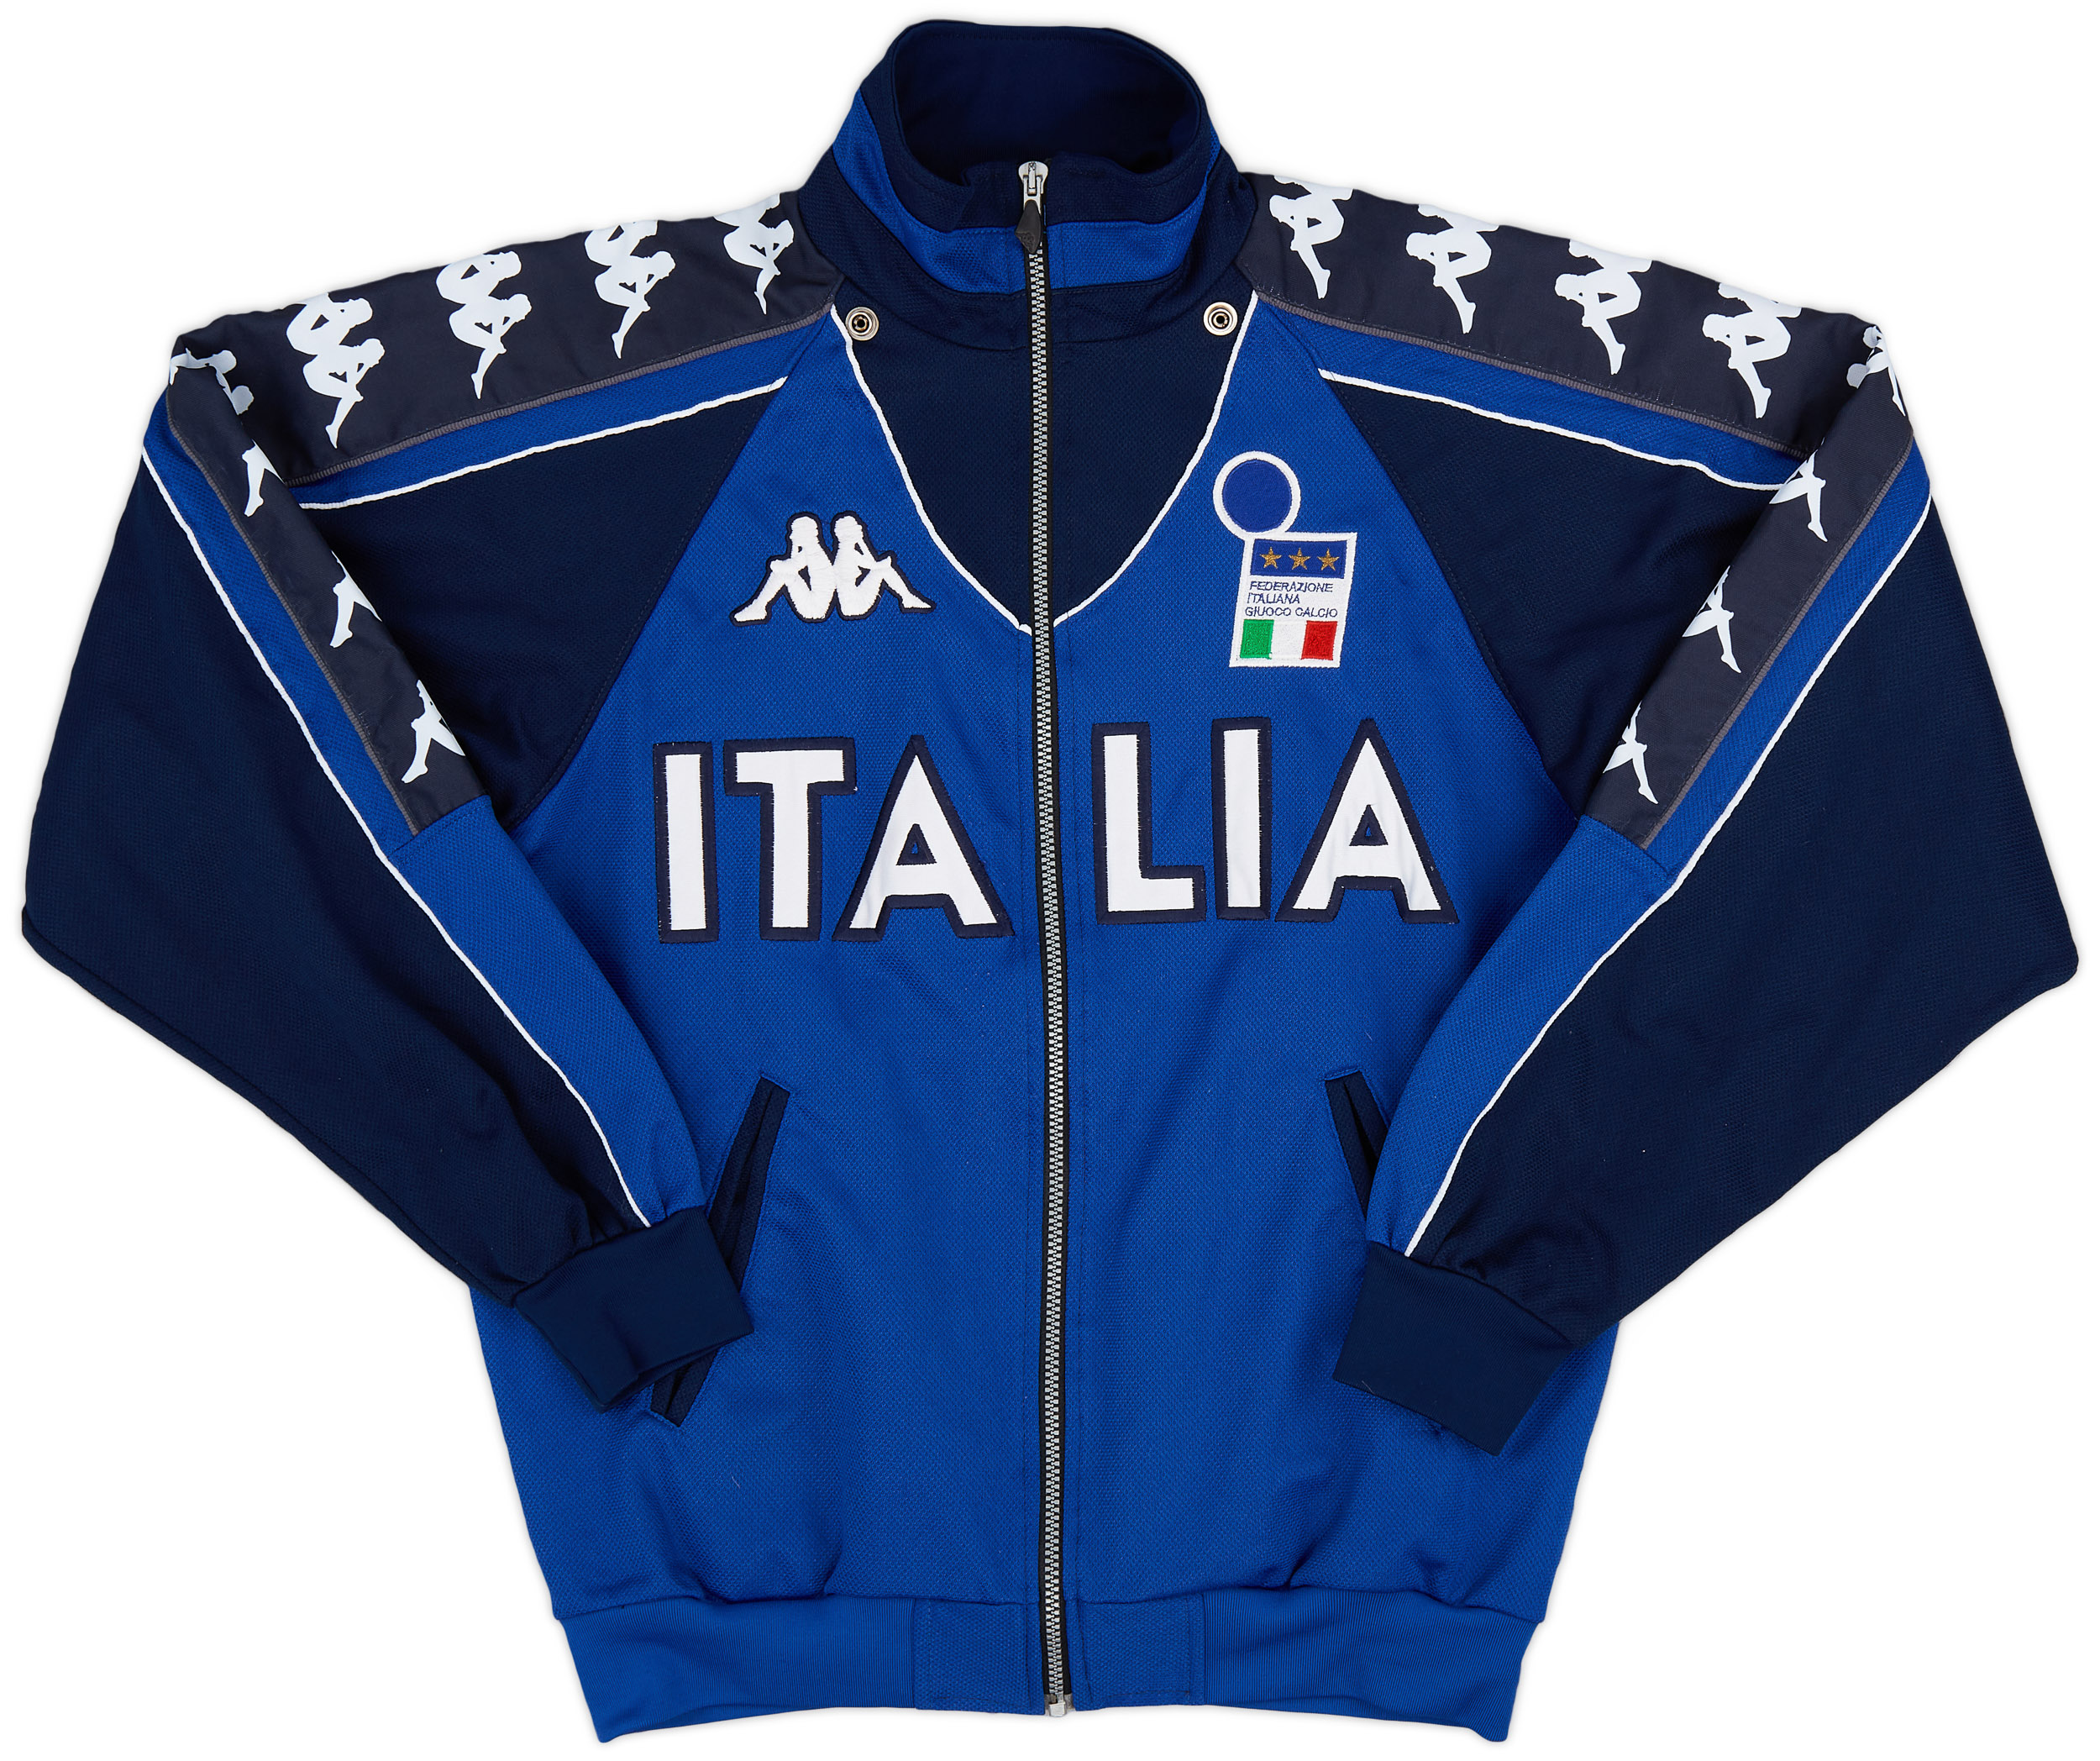 1999-00 Italy Kappa Track Jacket - Excellent 9/10 -